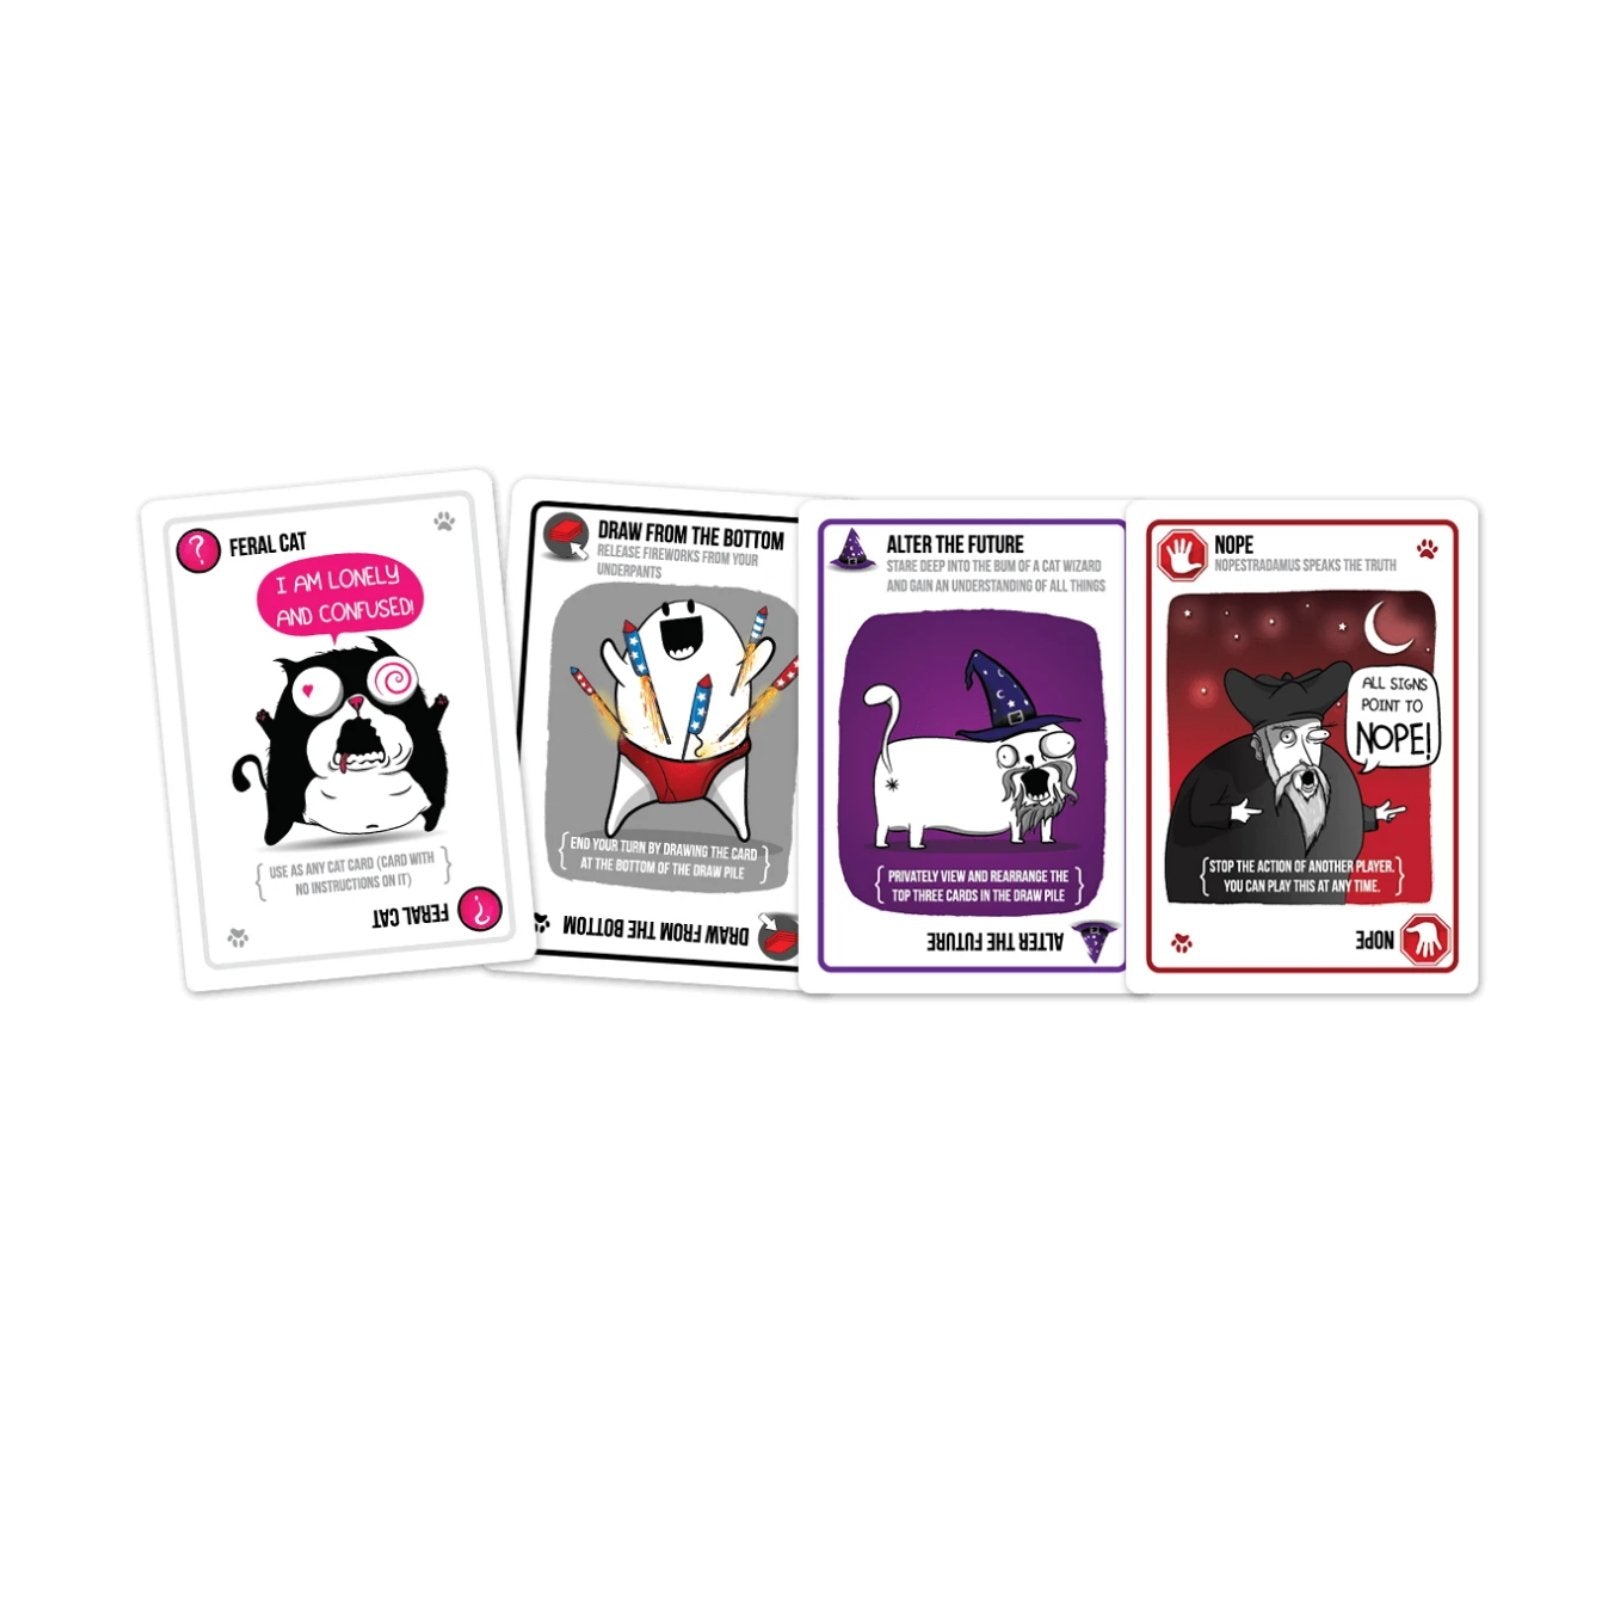 Exploding Kittens Party Pack Board Game